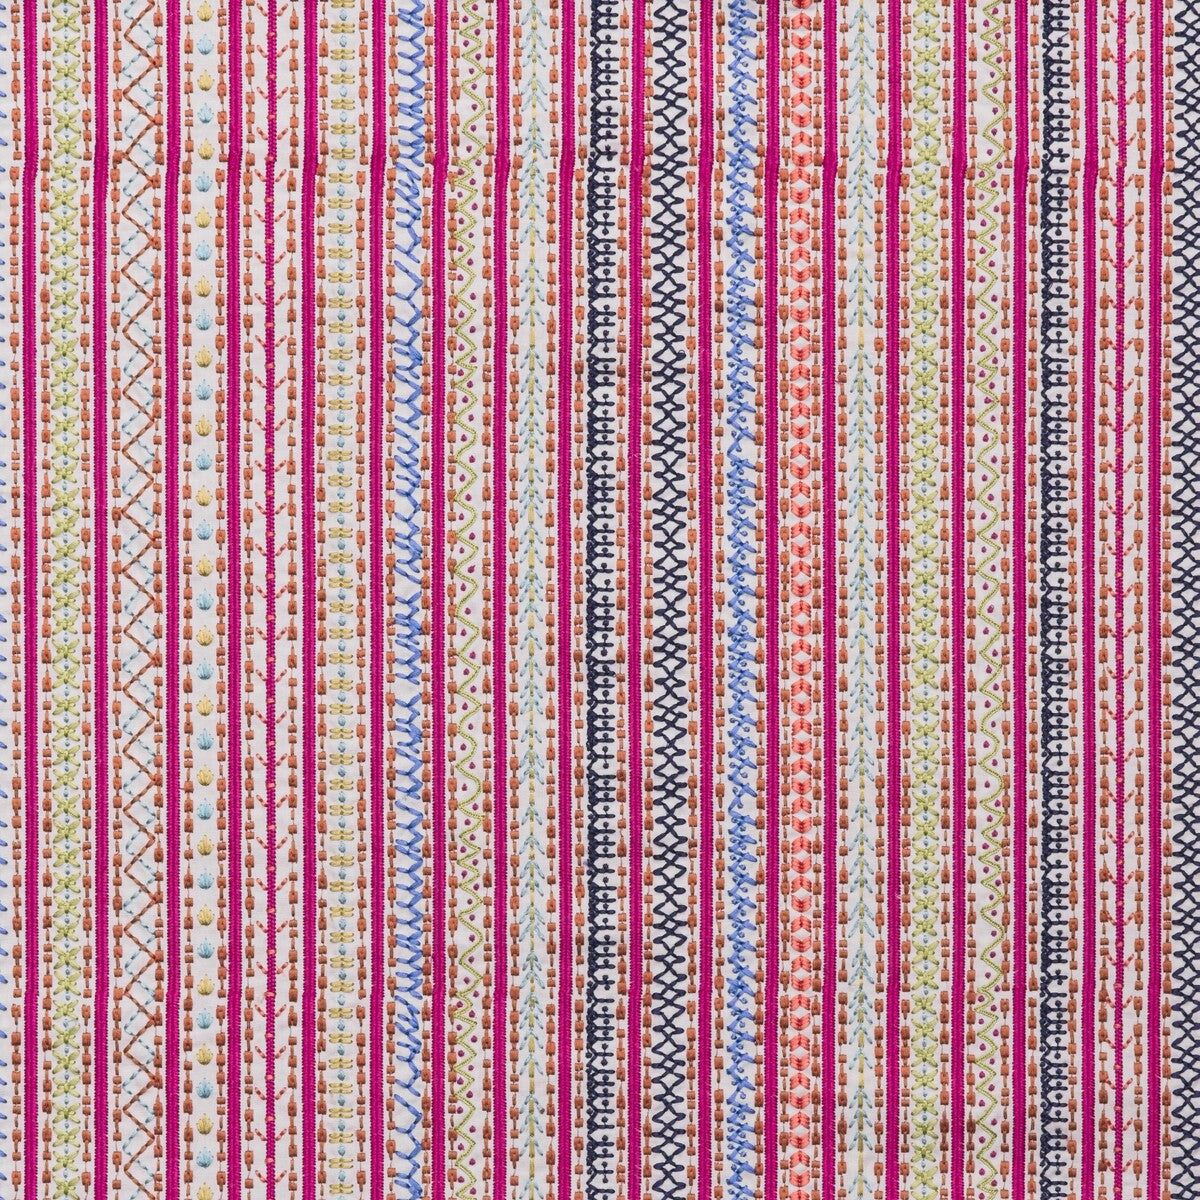 Capri fabric in pink color - pattern BFC-3680.7125.0 - by Lee Jofa in the Blithfield collection